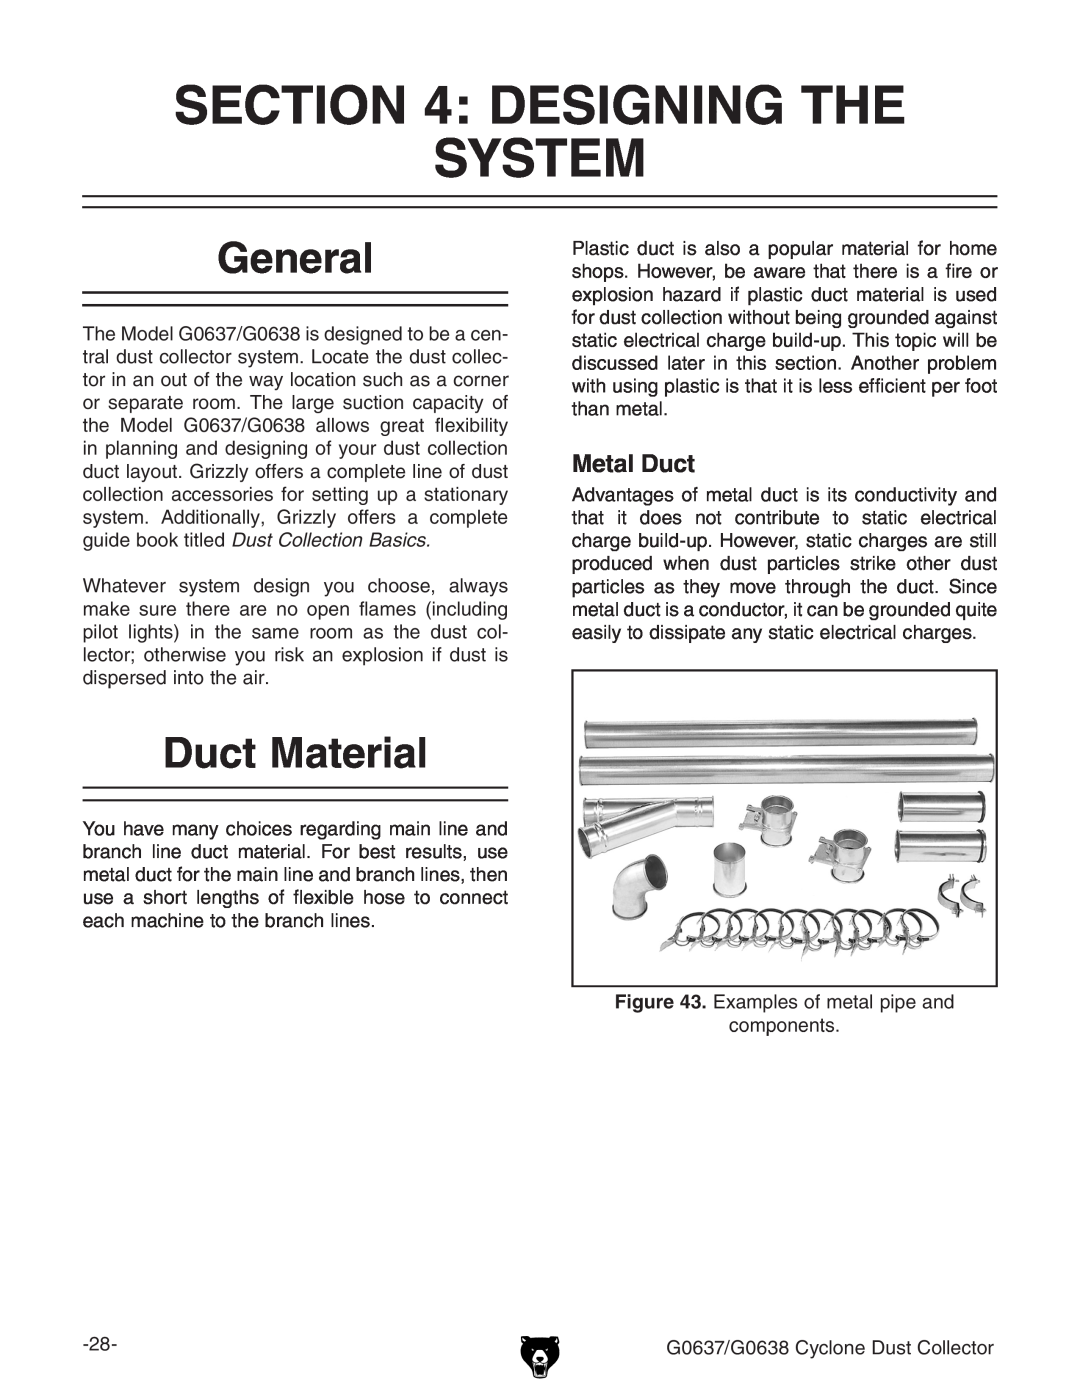 Grizzly G0637, G0638 owner manual Designing The System, General, Duct Material, Metal Duct, designing the system 